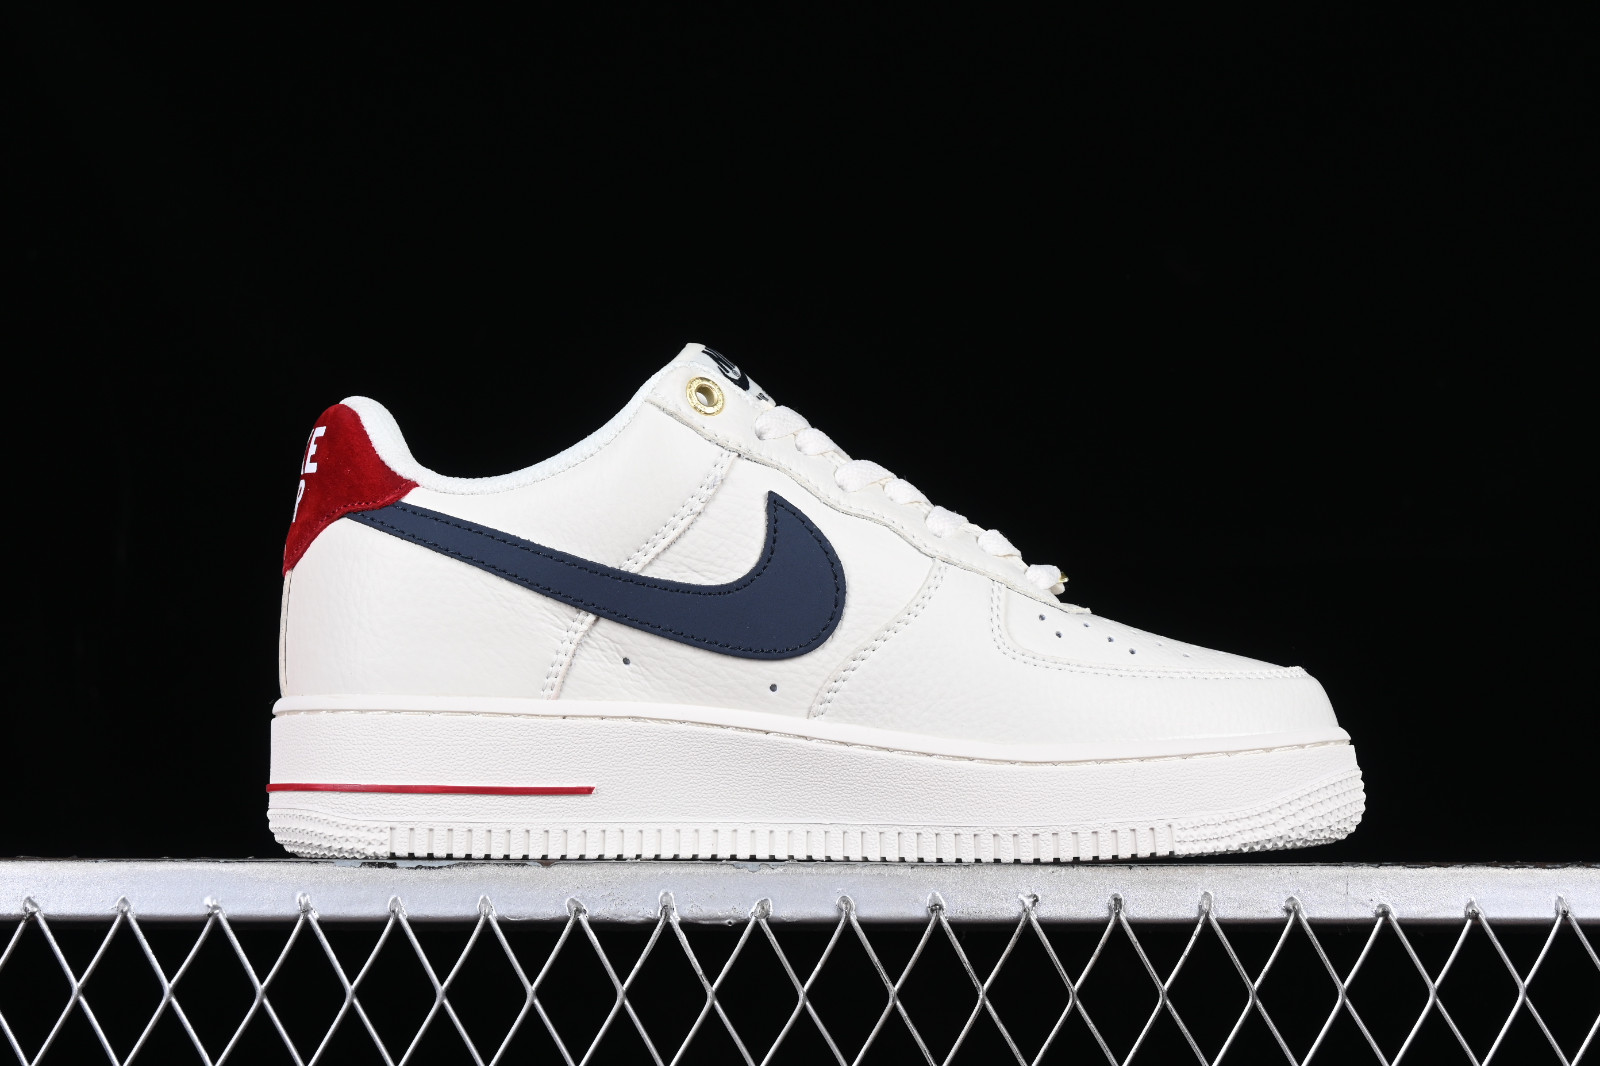 Nike Air Force 1 07 Low 40 Off White Navy Blue Dark Red BS9055 - 740 -  BioenergylistsShops - nike odyssey react 20 running shoes ao9819005 size  best